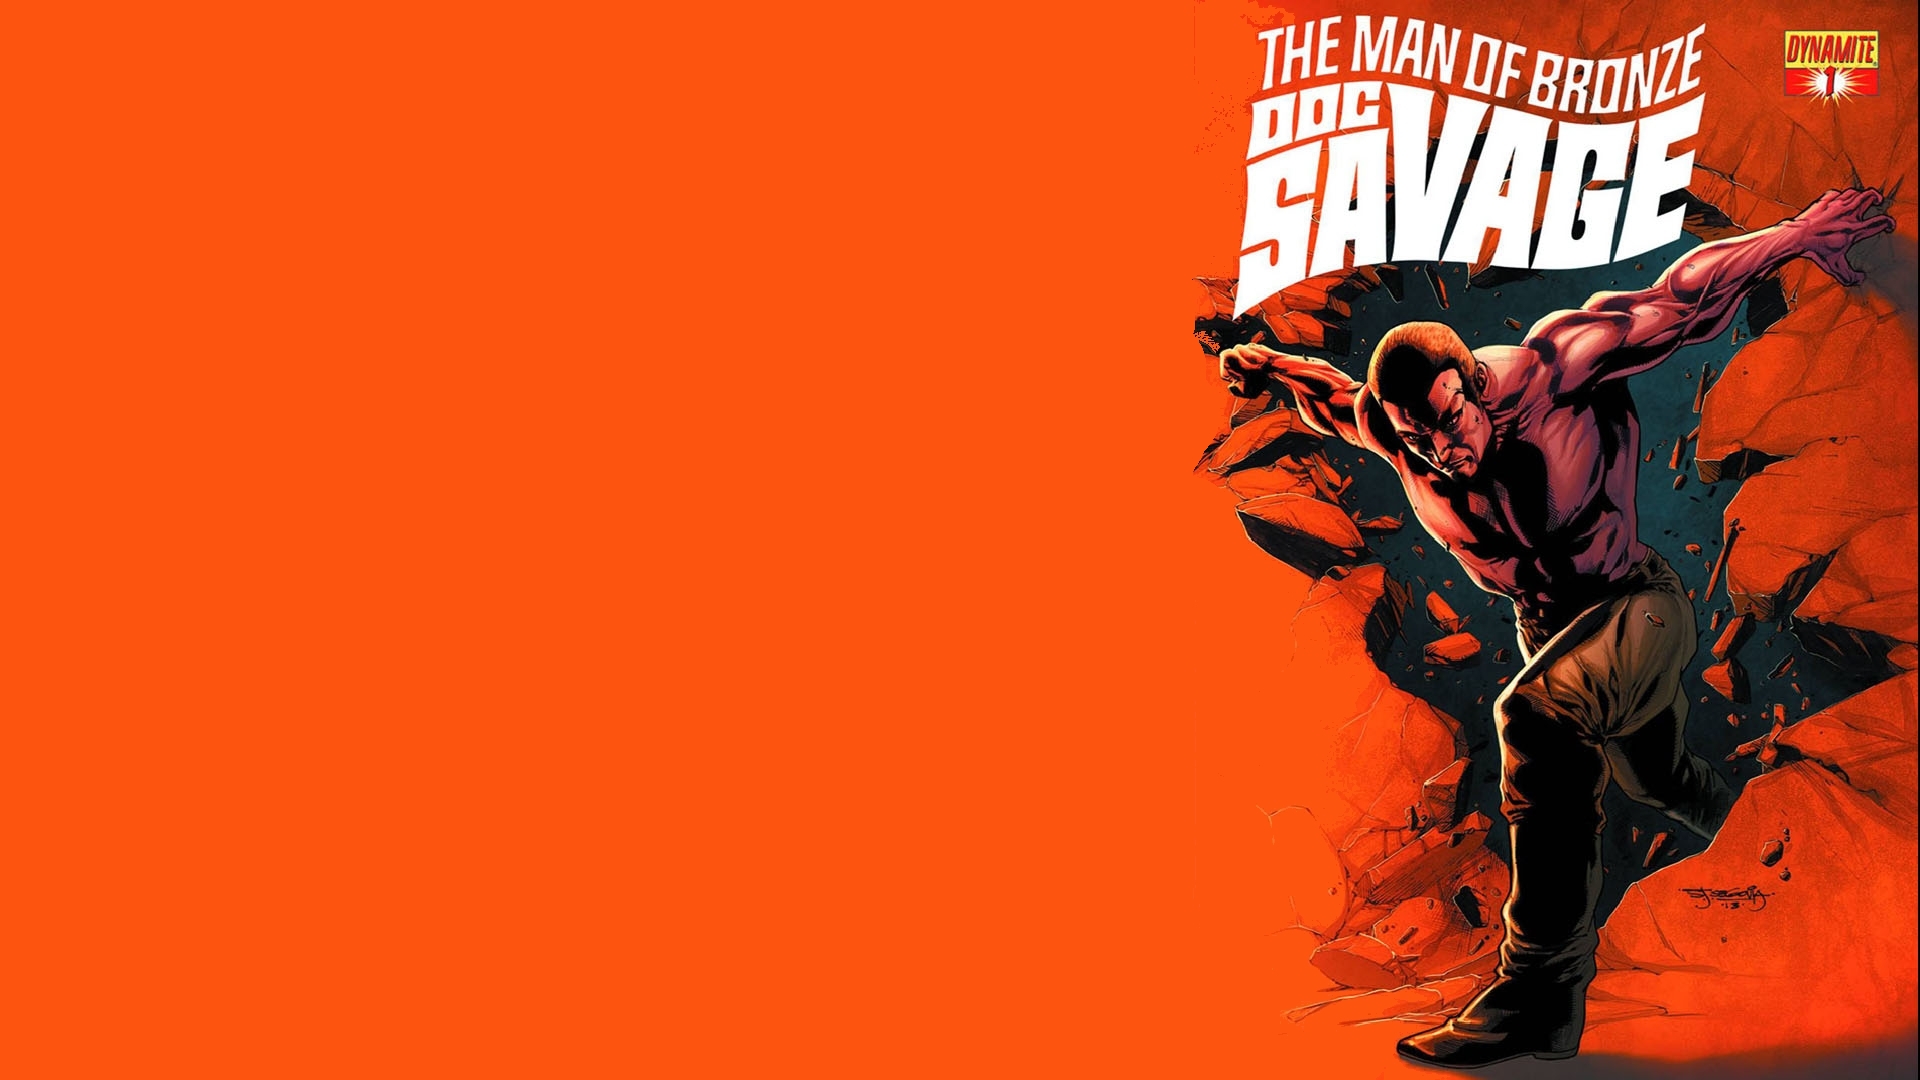 3 Doc Savage Hd Wallpapers Backgrounds Wallpaper Abyss HD Wallpapers Download Free Map Images Wallpaper [wallpaper684.blogspot.com]